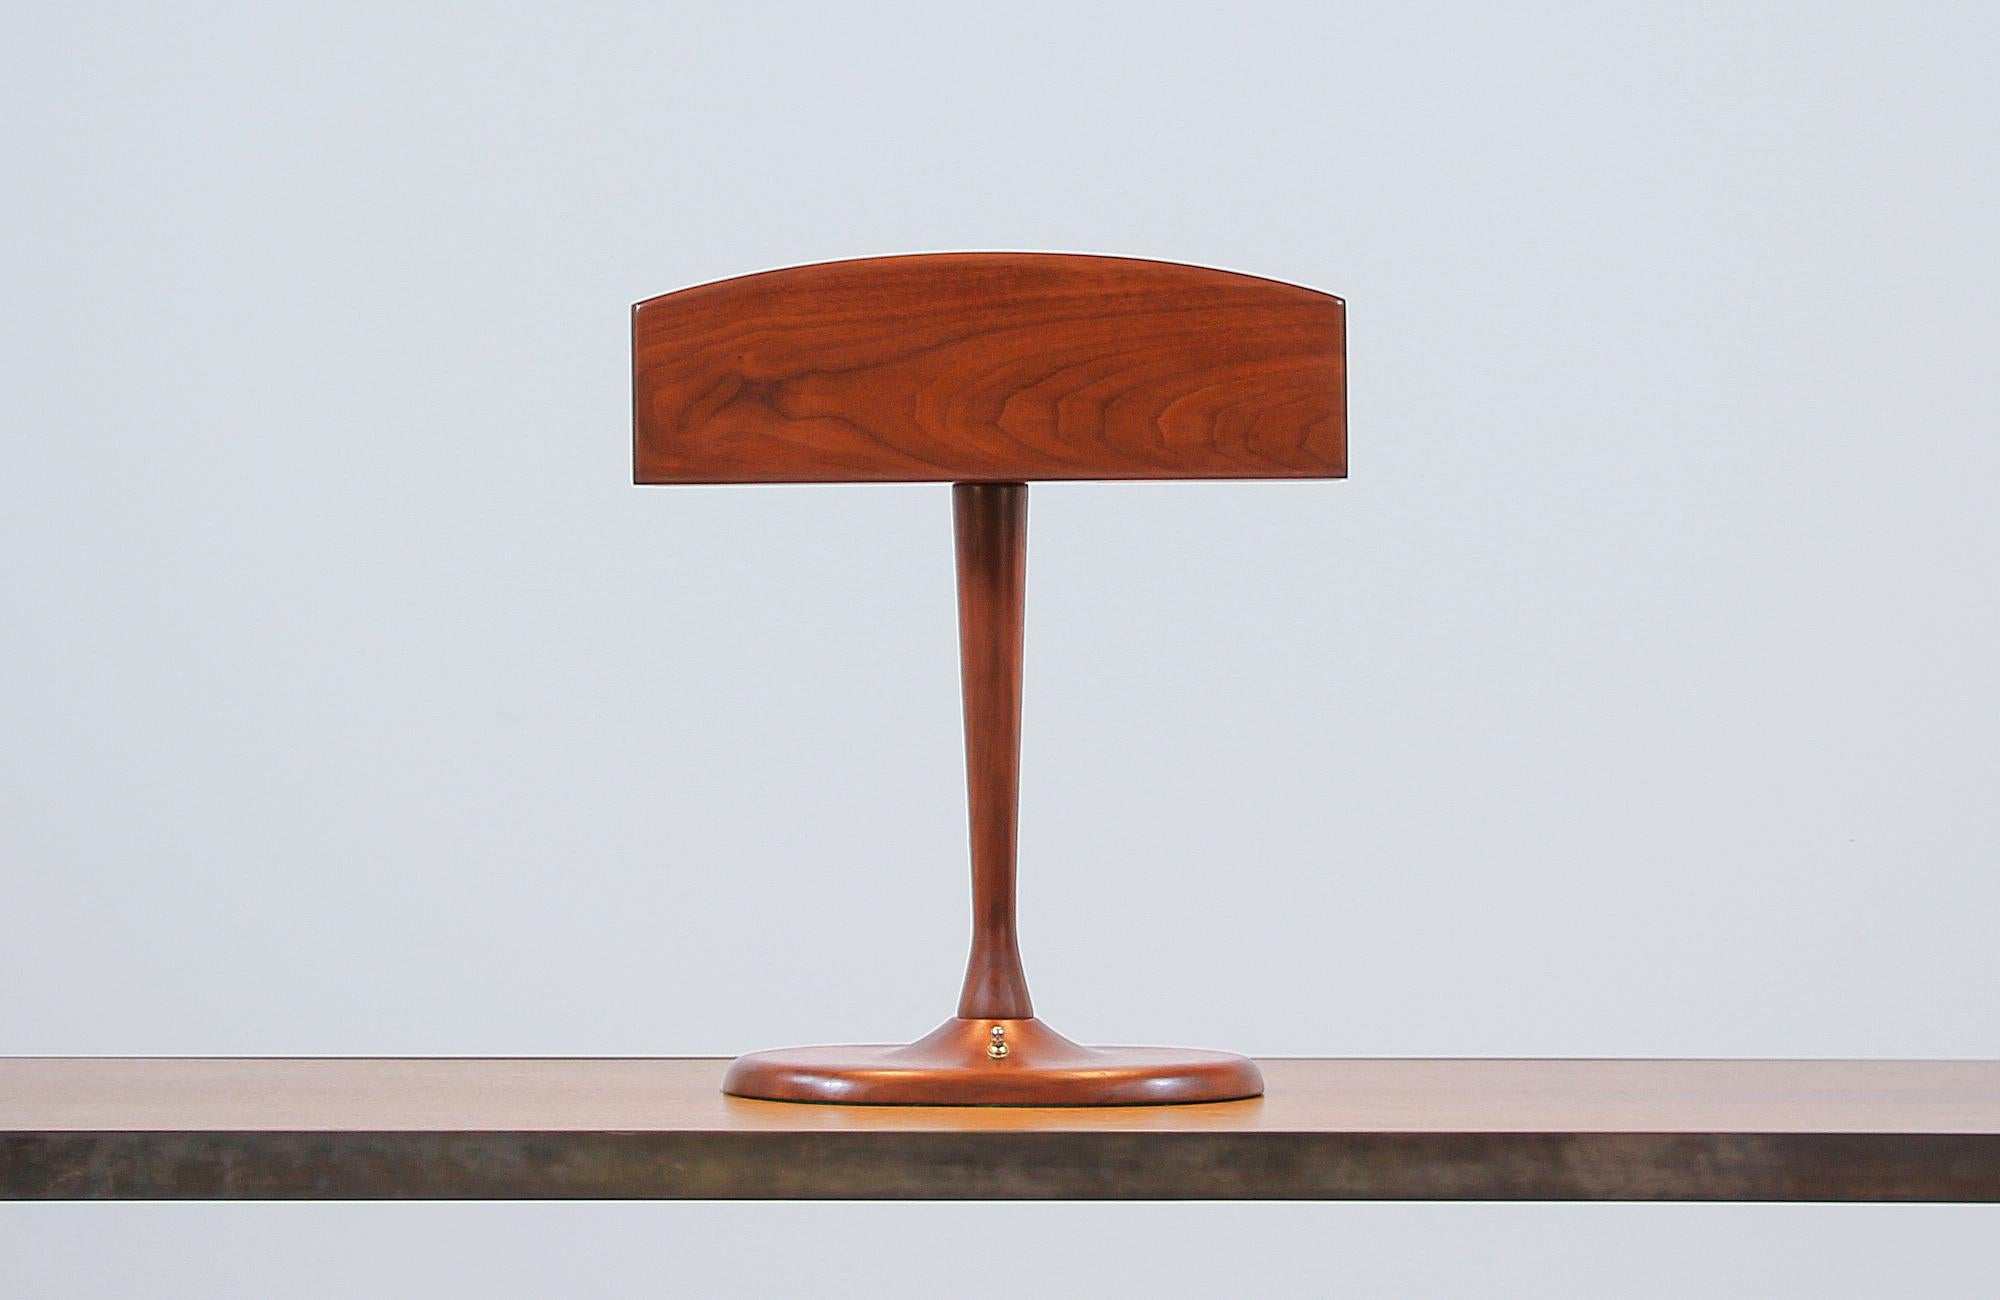 Beautiful modern desk lamp designed and manufactured in the United States circa 1960s. The mix of organic lines and midcentury aesthetic on this unique table lamp create a smooth, tall look on the warm walnut wood body finishes featuring a